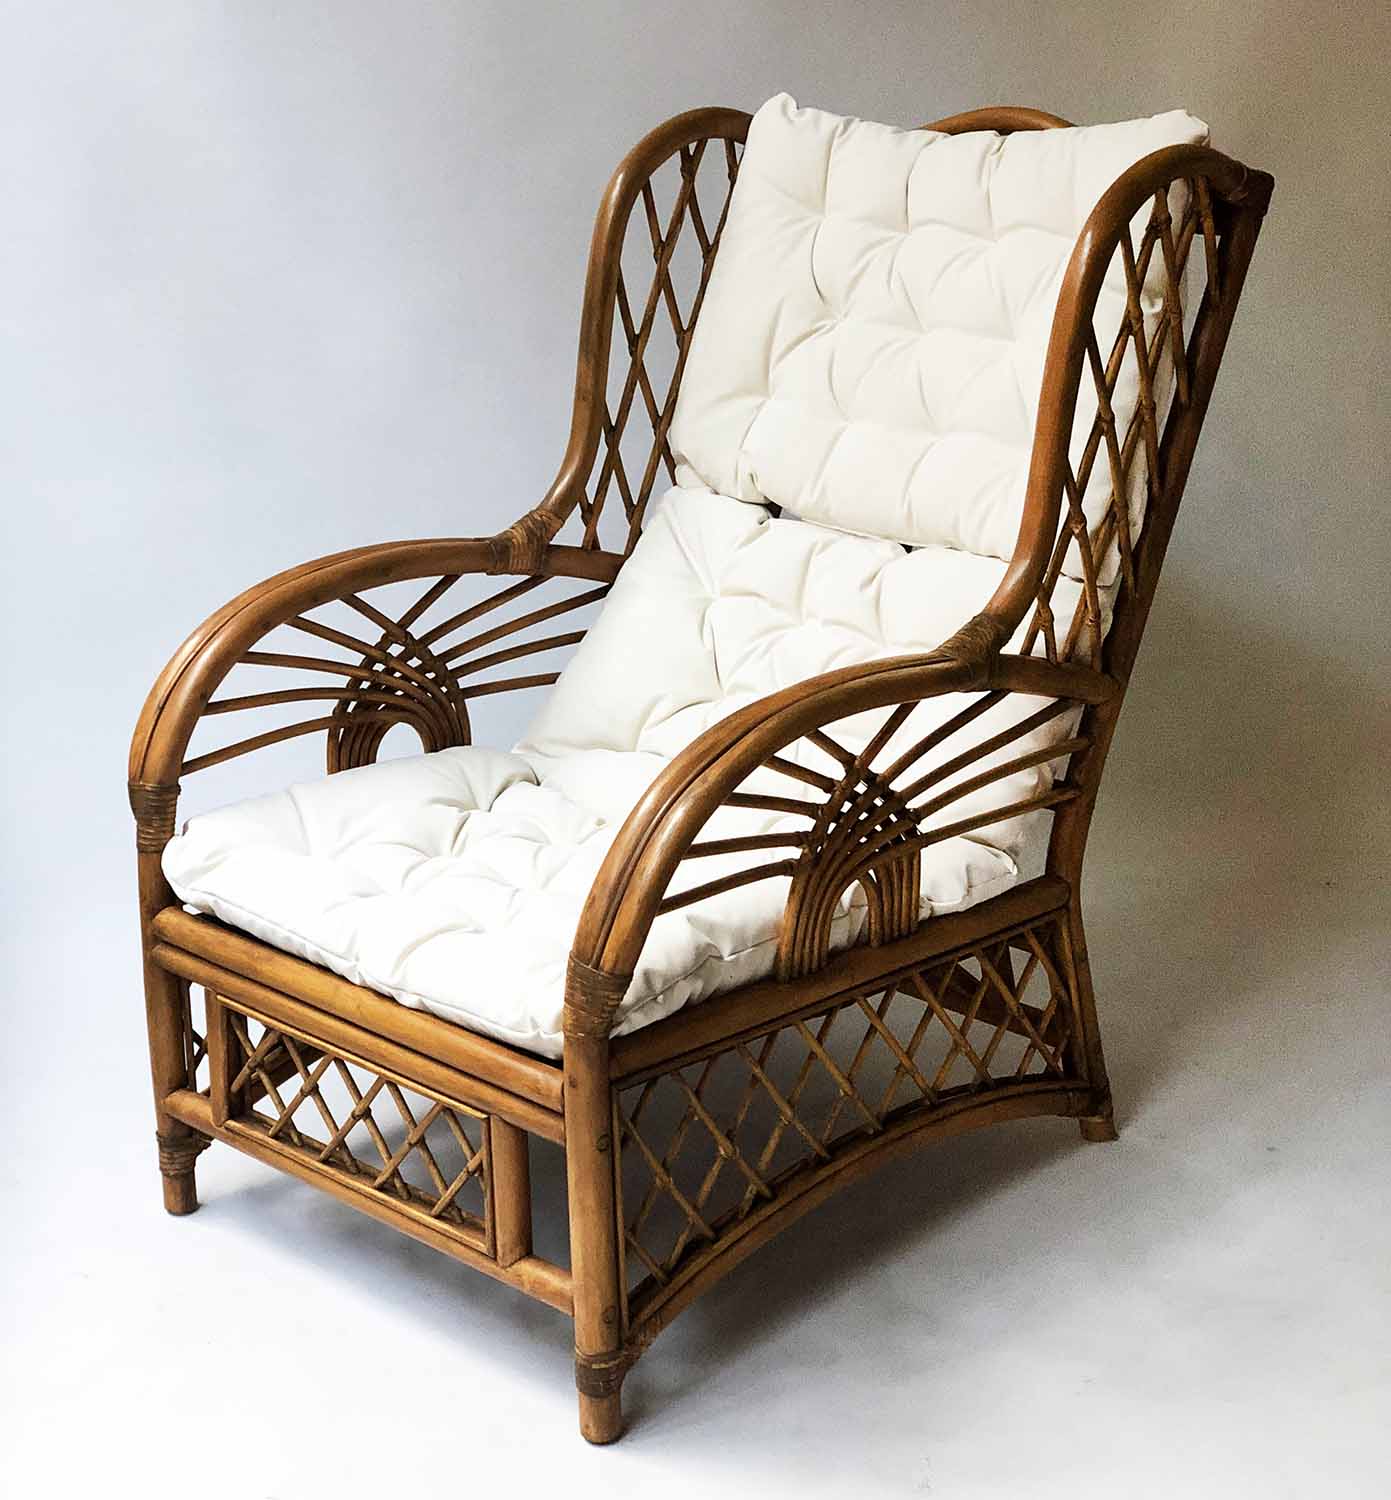 RATTAN ARMCHAIR, vintage 1930's inspired bent and woven rattan with cushion pads, 67cm W.